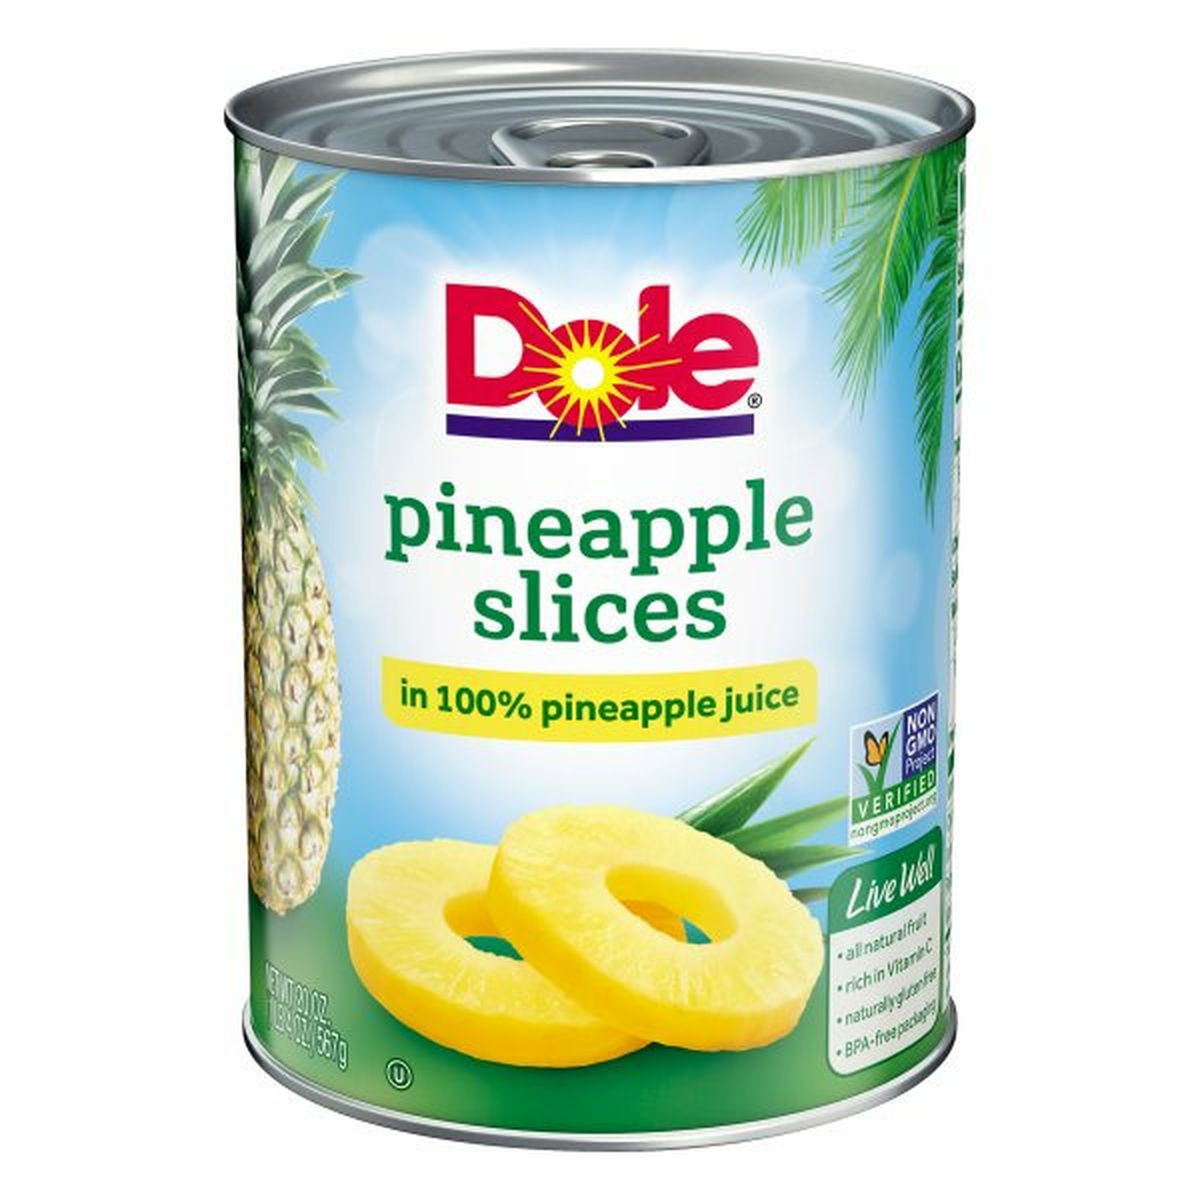 Calories in Dole Pineapple, Slices, in 100% Pineapple Juice